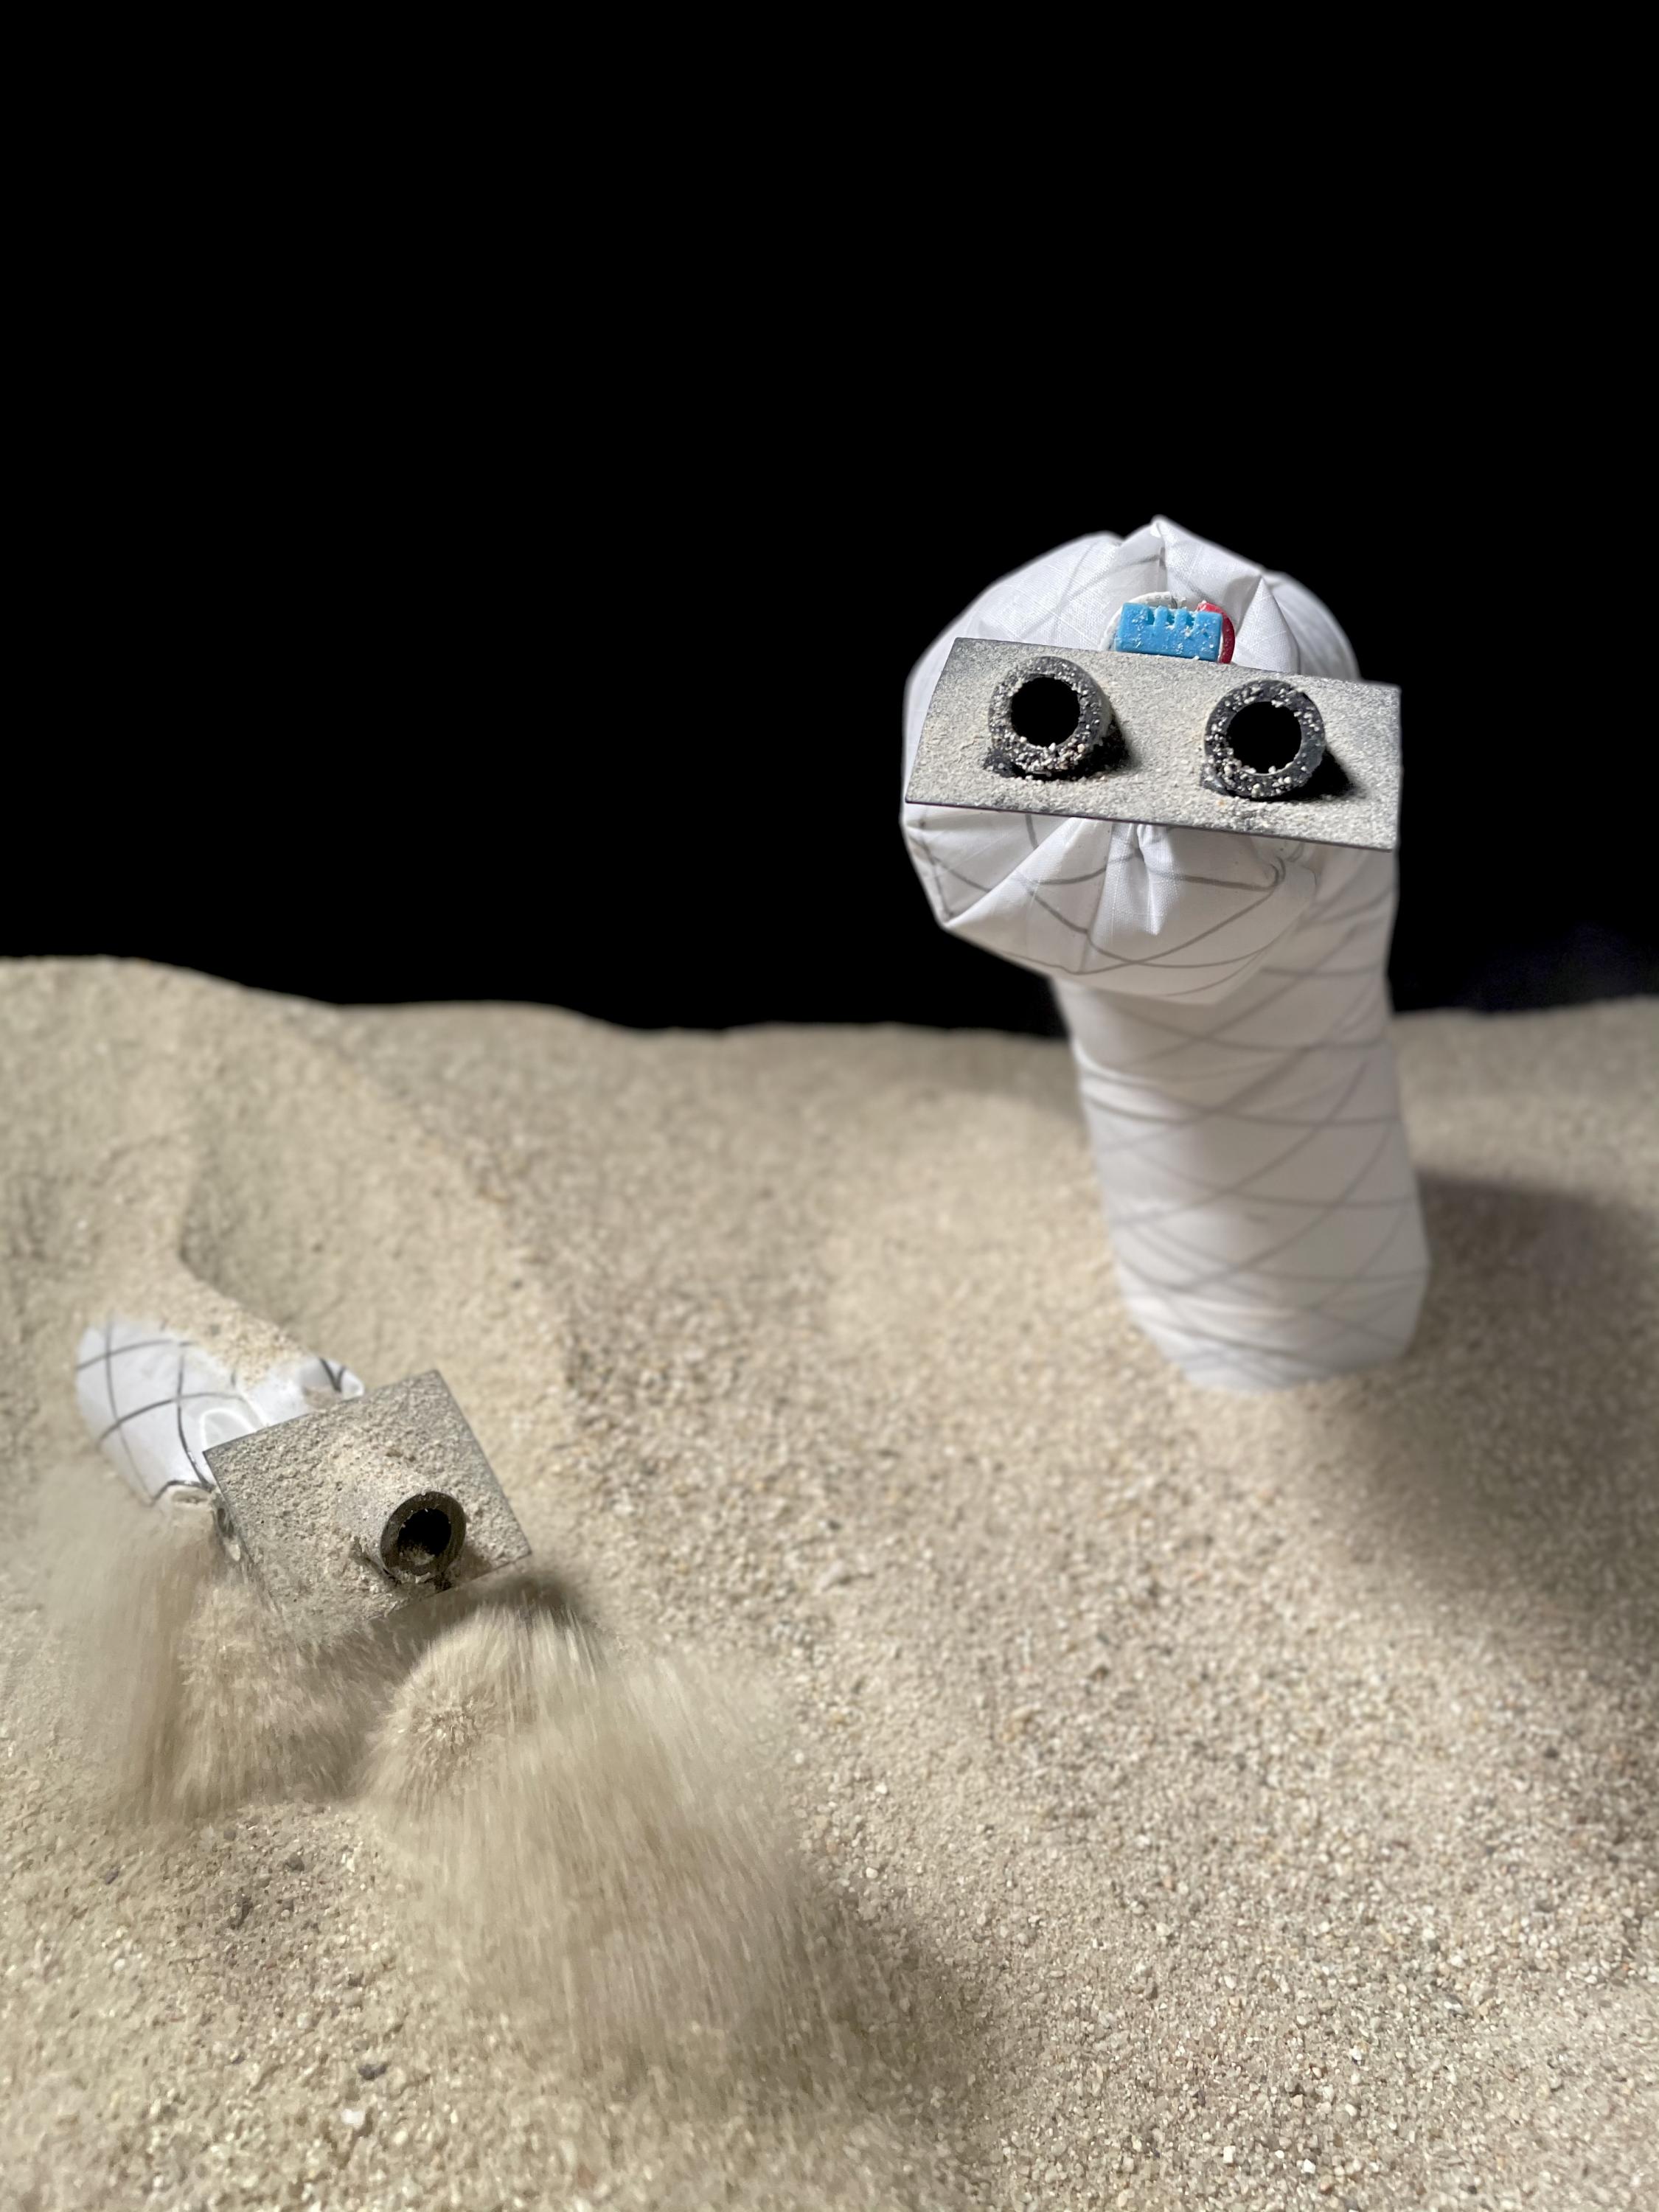 A small, exploratory, soft robot such as this has a variety of applications where shallow burrowing through dry granular media is needed, such as soil sampling, underground installation of utilities and erosion control (Photo: UC Santa Barbara)